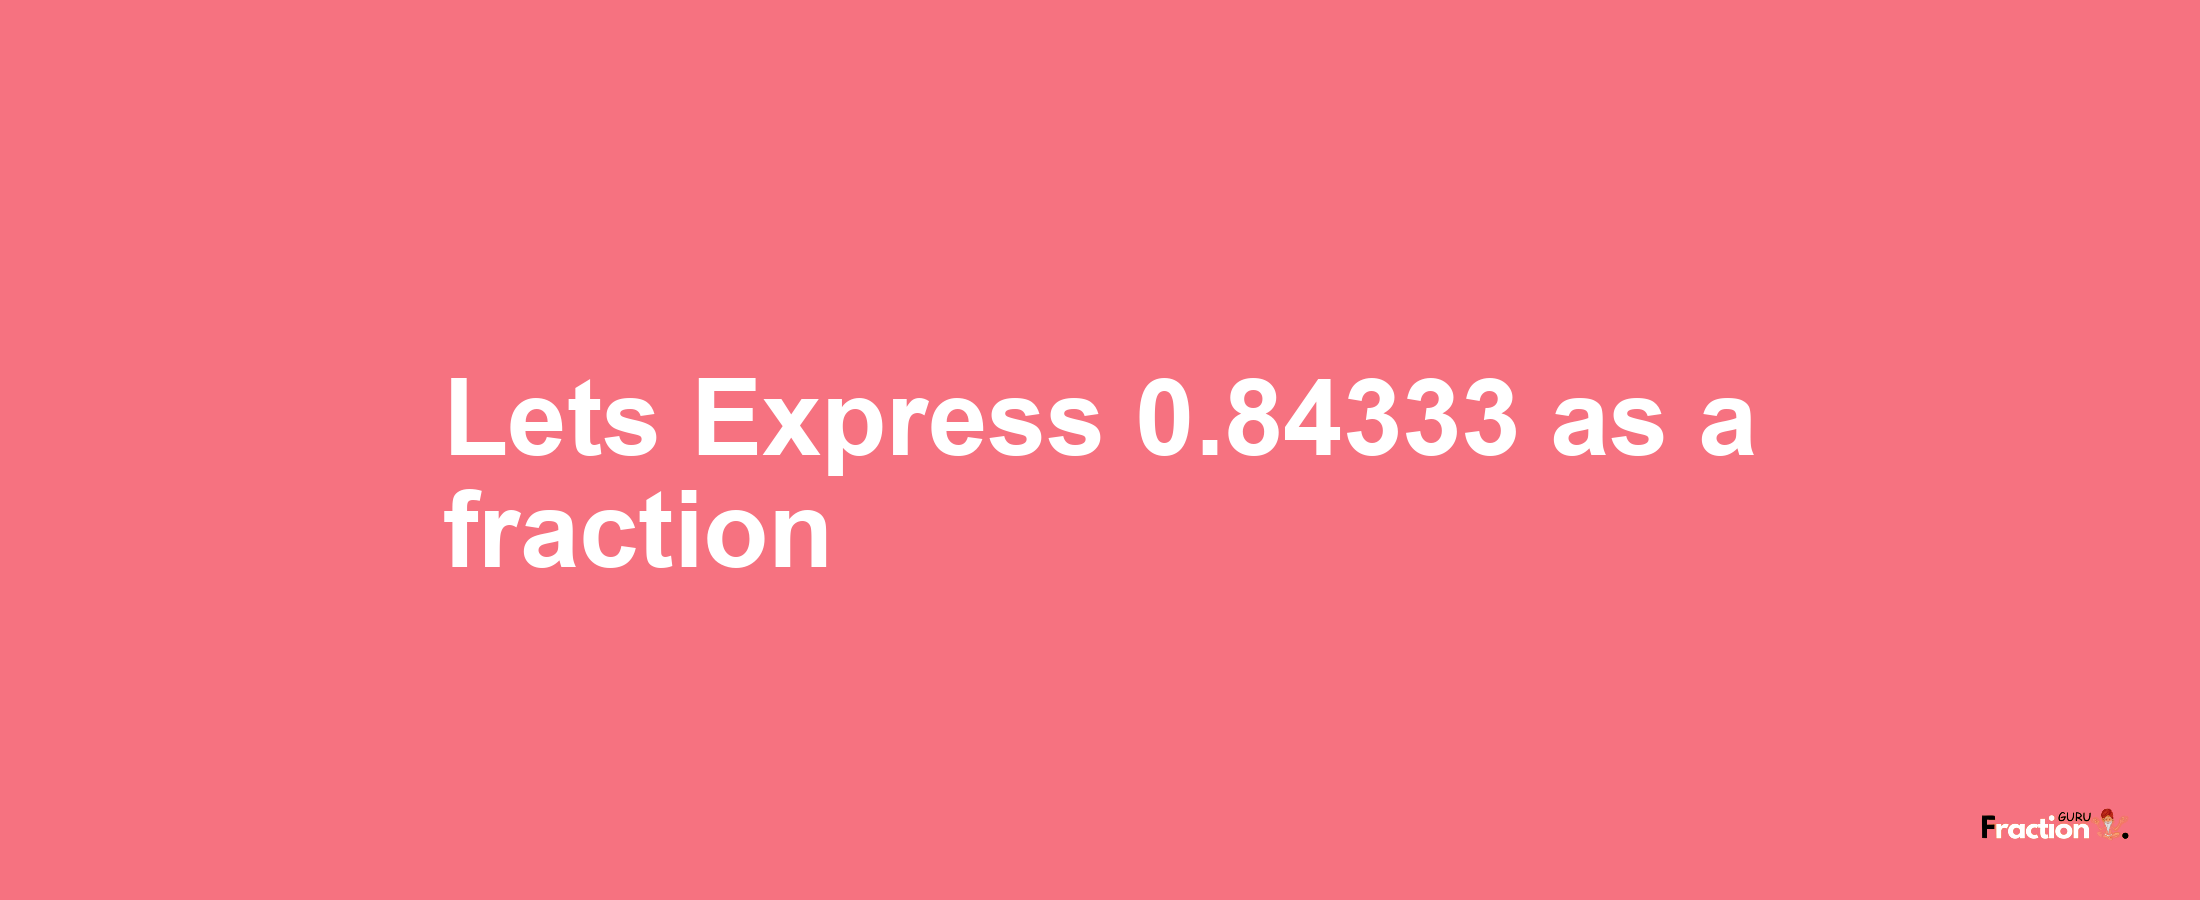 Lets Express 0.84333 as afraction